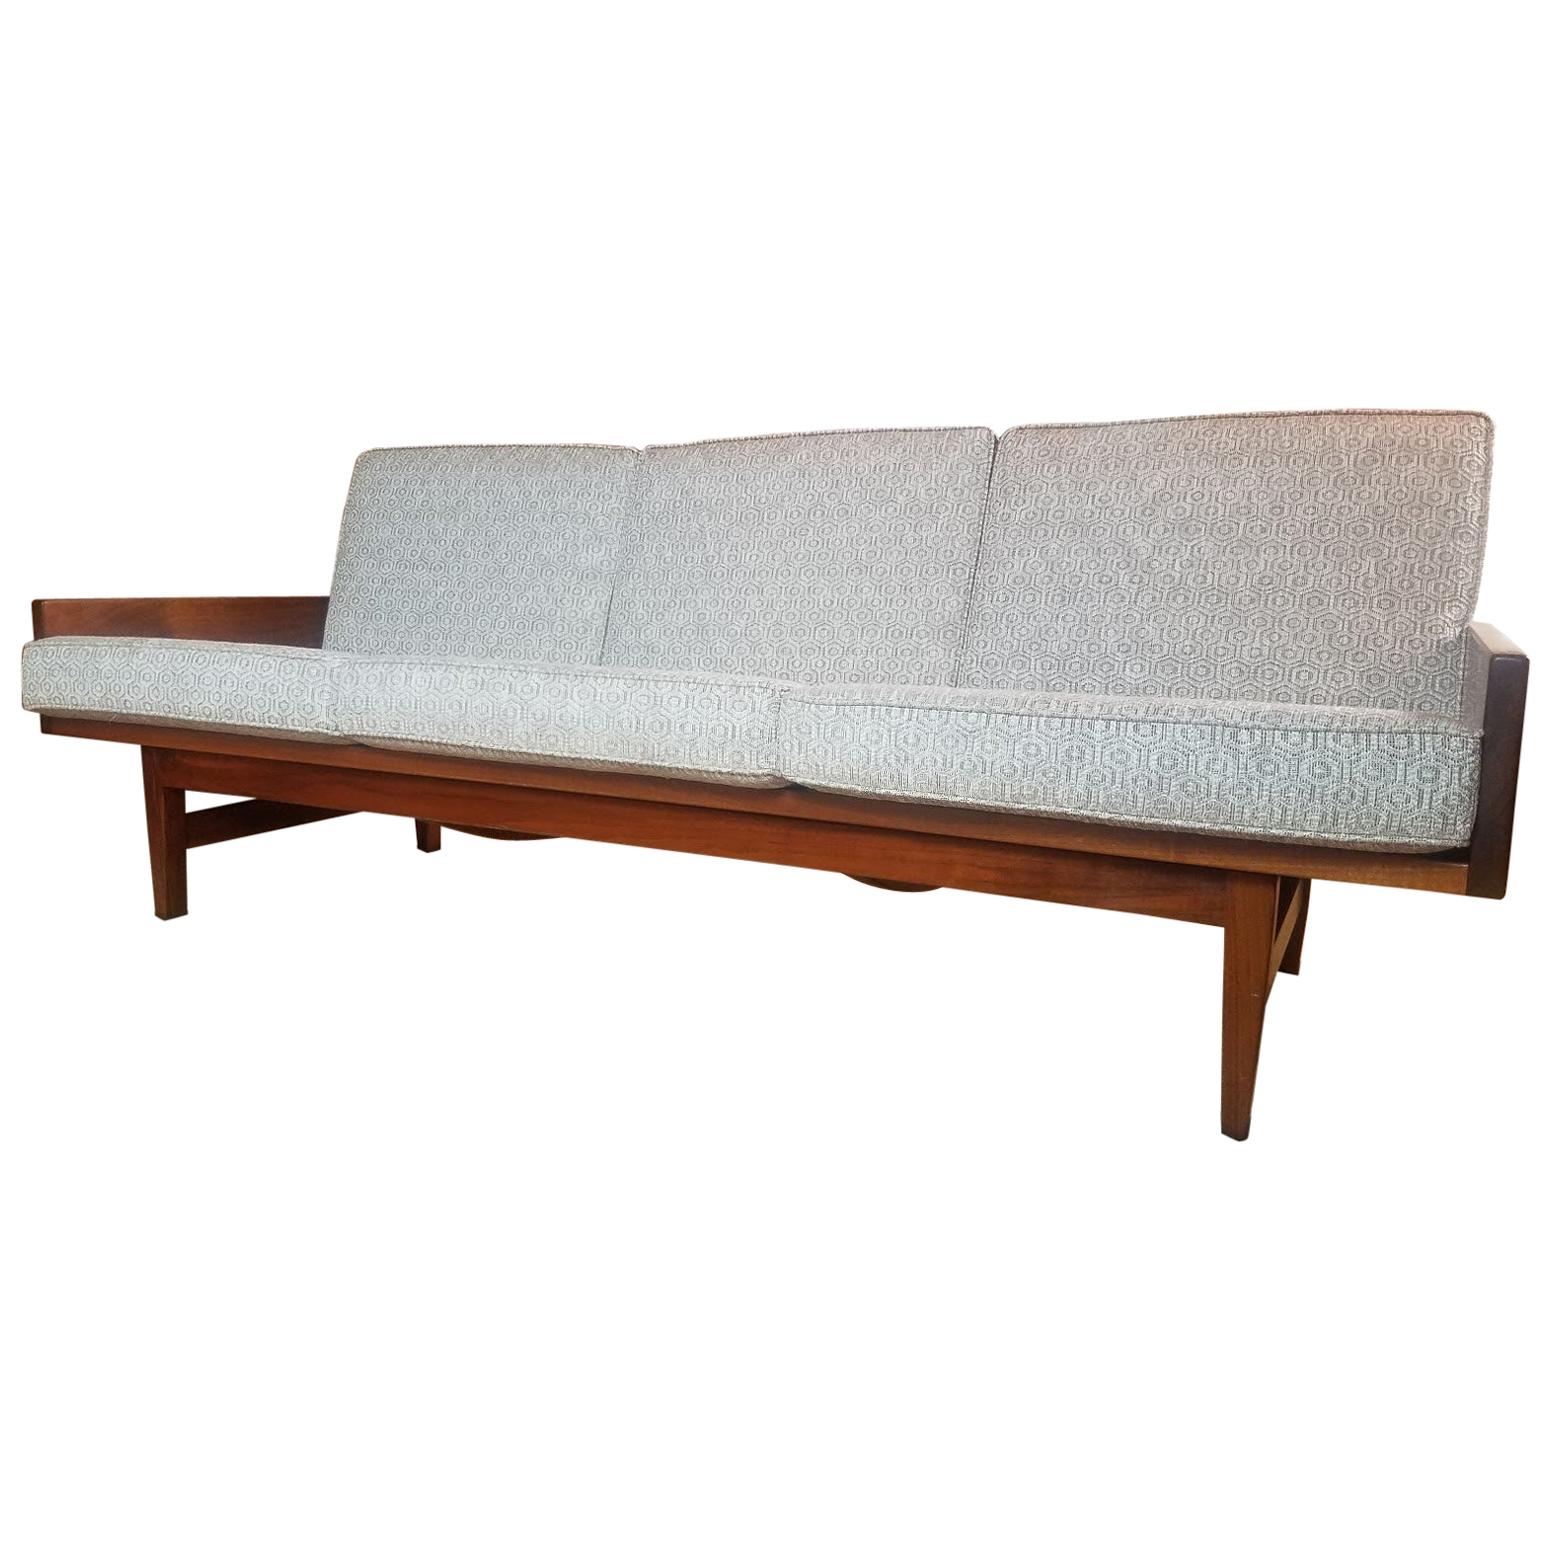 Arden Riddle 3-Seat Sofa Studio Crafted 1969